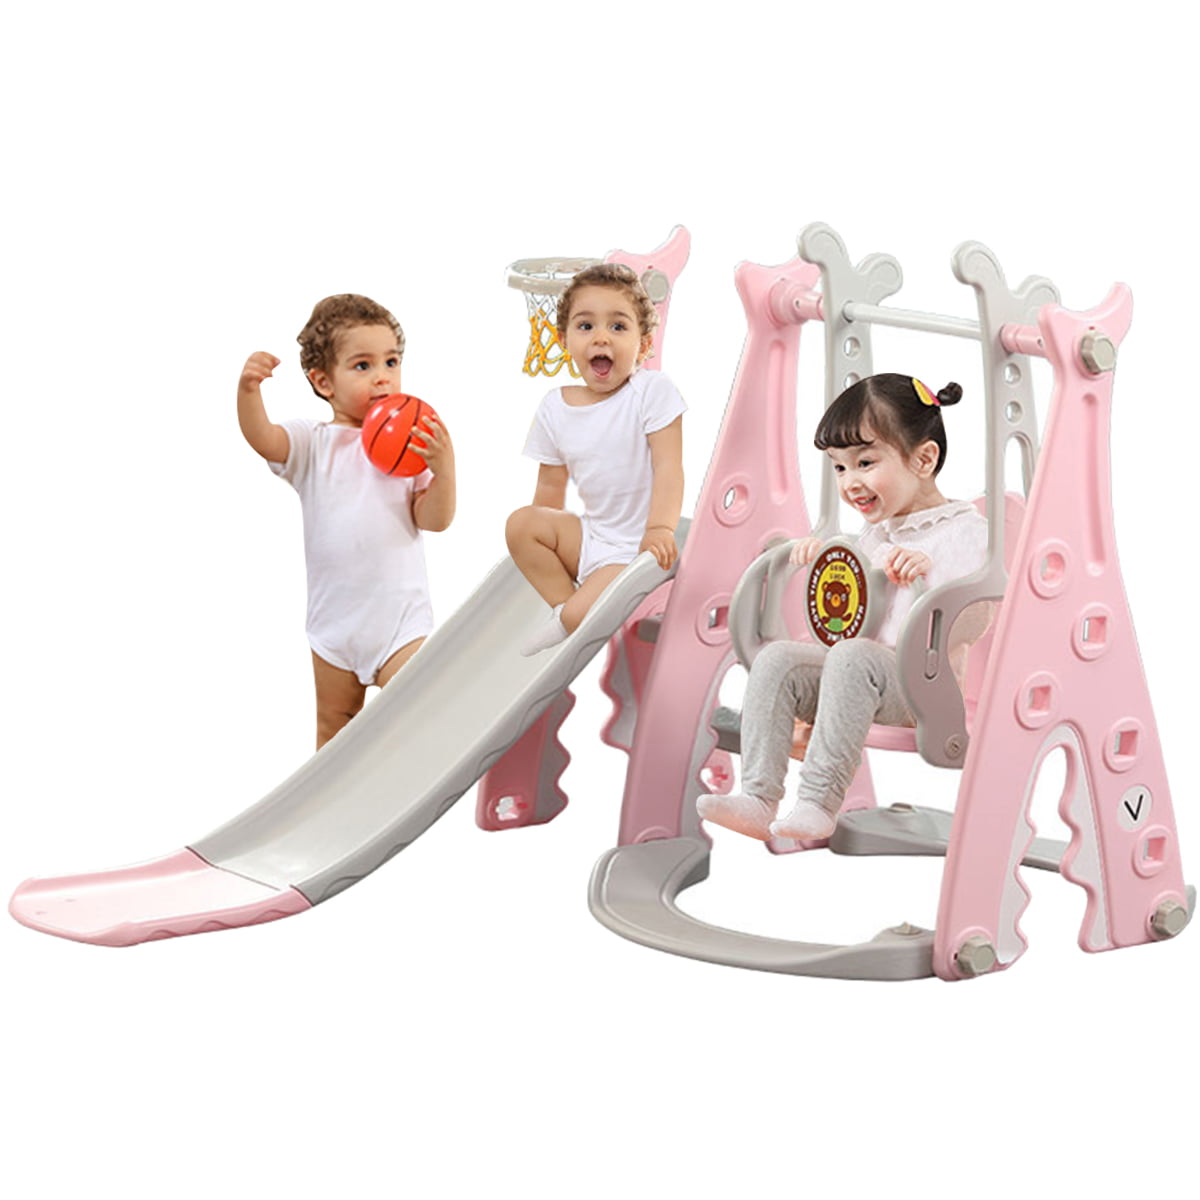 Toddler Climber Slide Swing Play Set Indoor/Outdoor Kid Playground Christmas Toy 